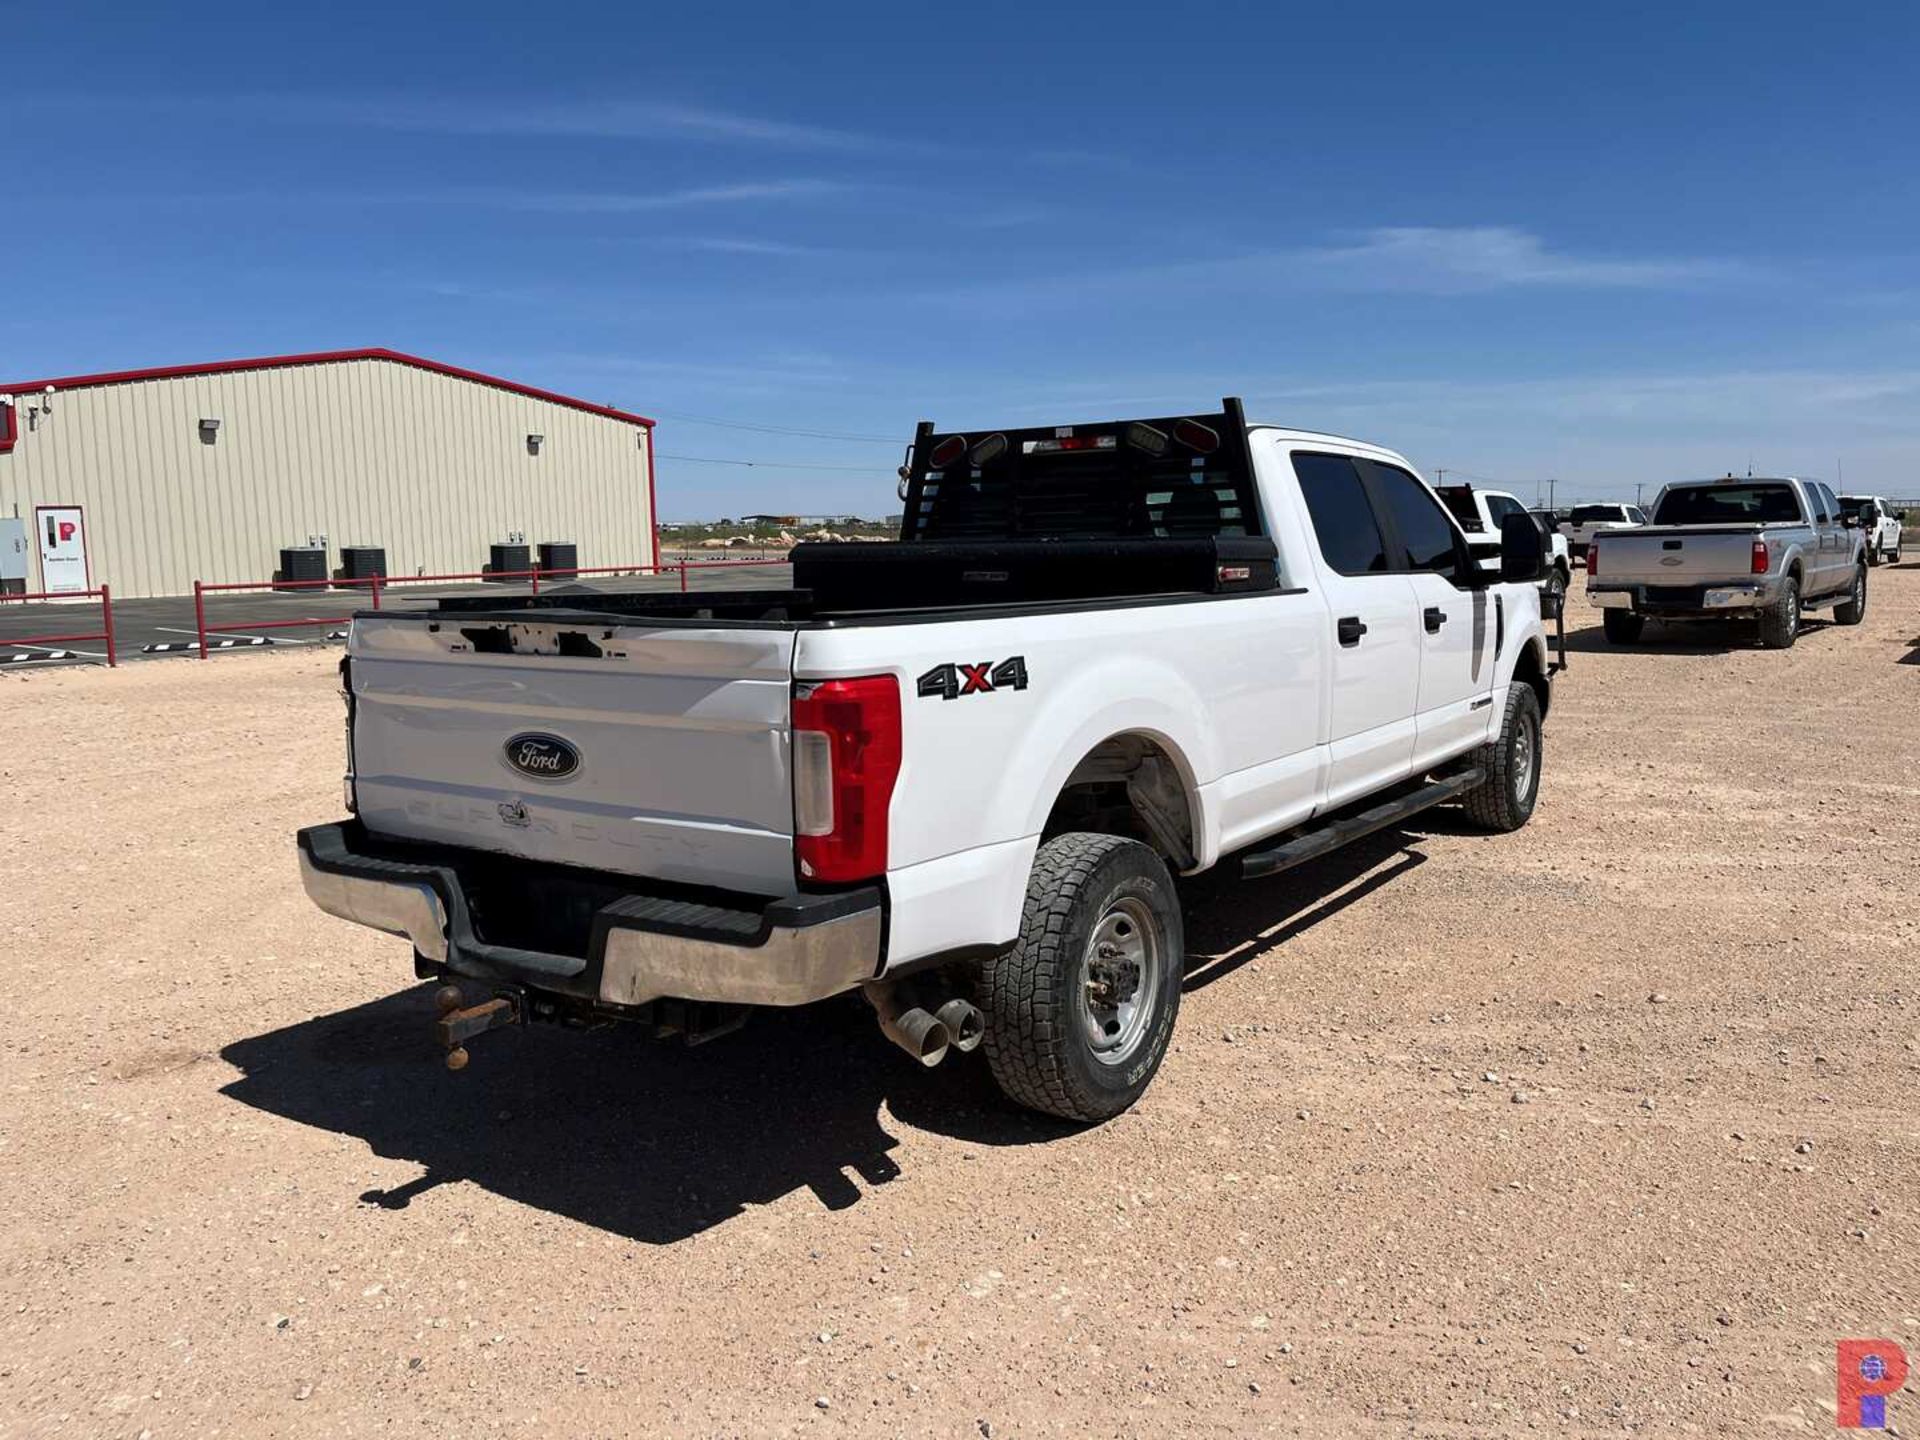 2017 FORD F-350 CREW CAB PICKUP TRUCK - Image 3 of 7